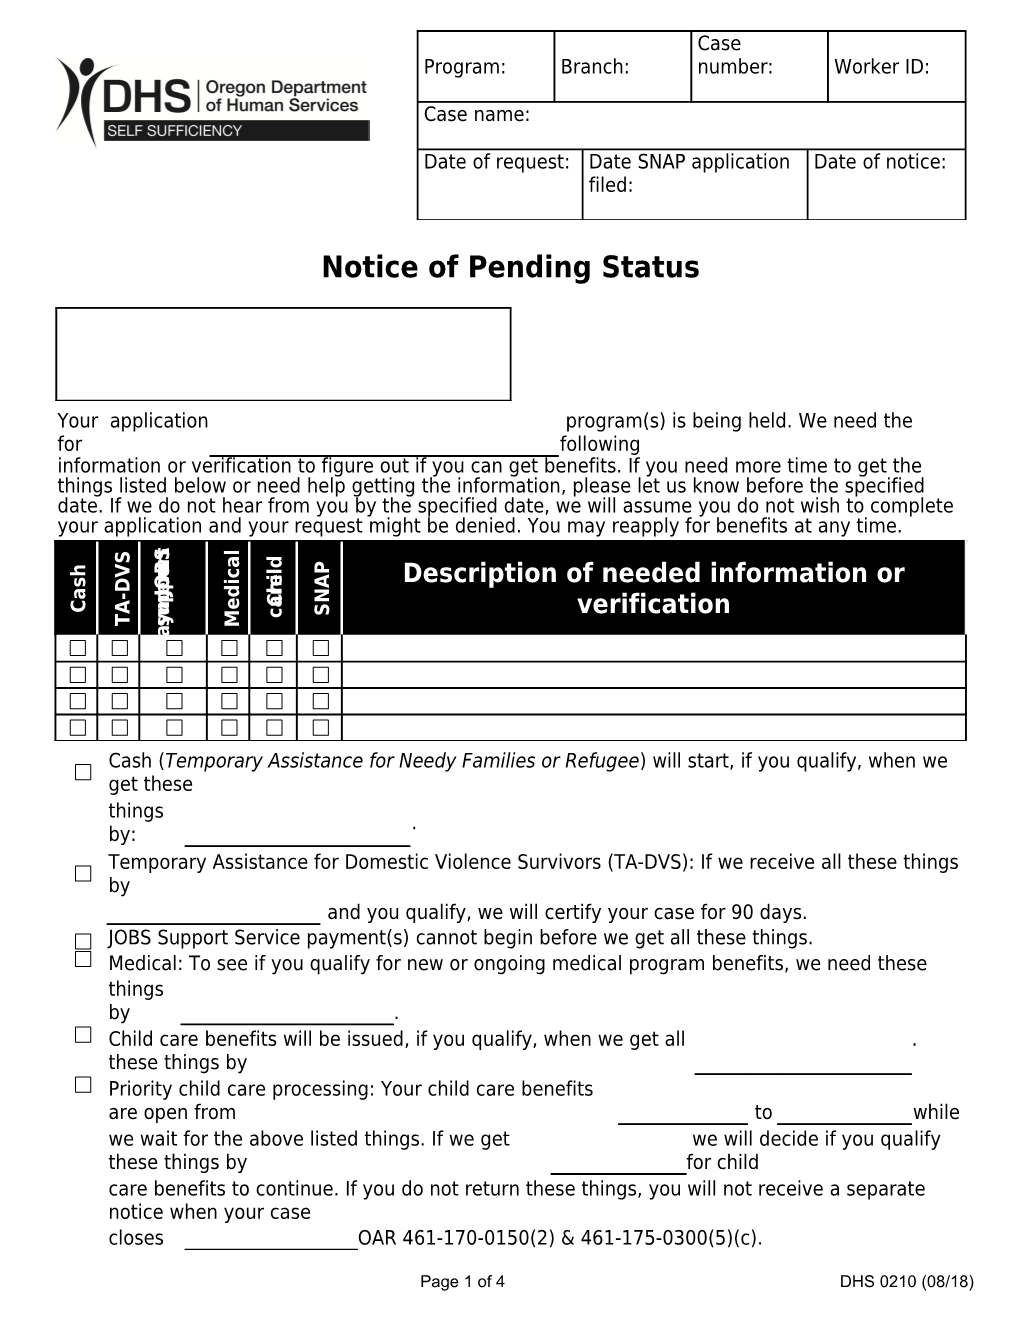 Notice of Pending Status DHS 0210 (10/15)